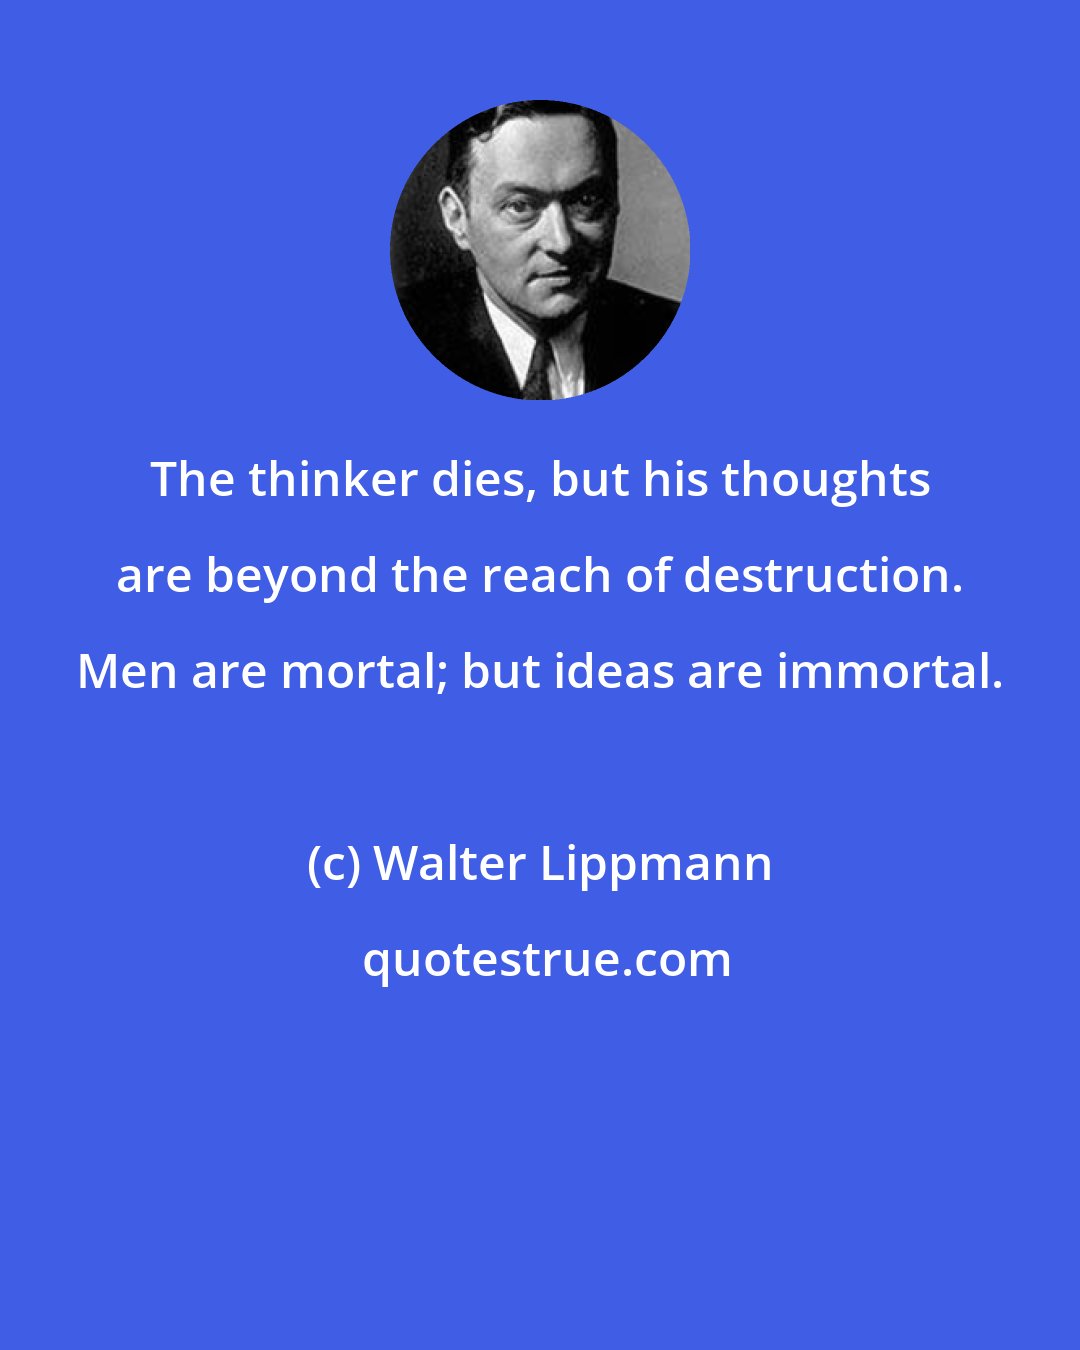 Walter Lippmann: The thinker dies, but his thoughts are beyond the reach of destruction. Men are mortal; but ideas are immortal.